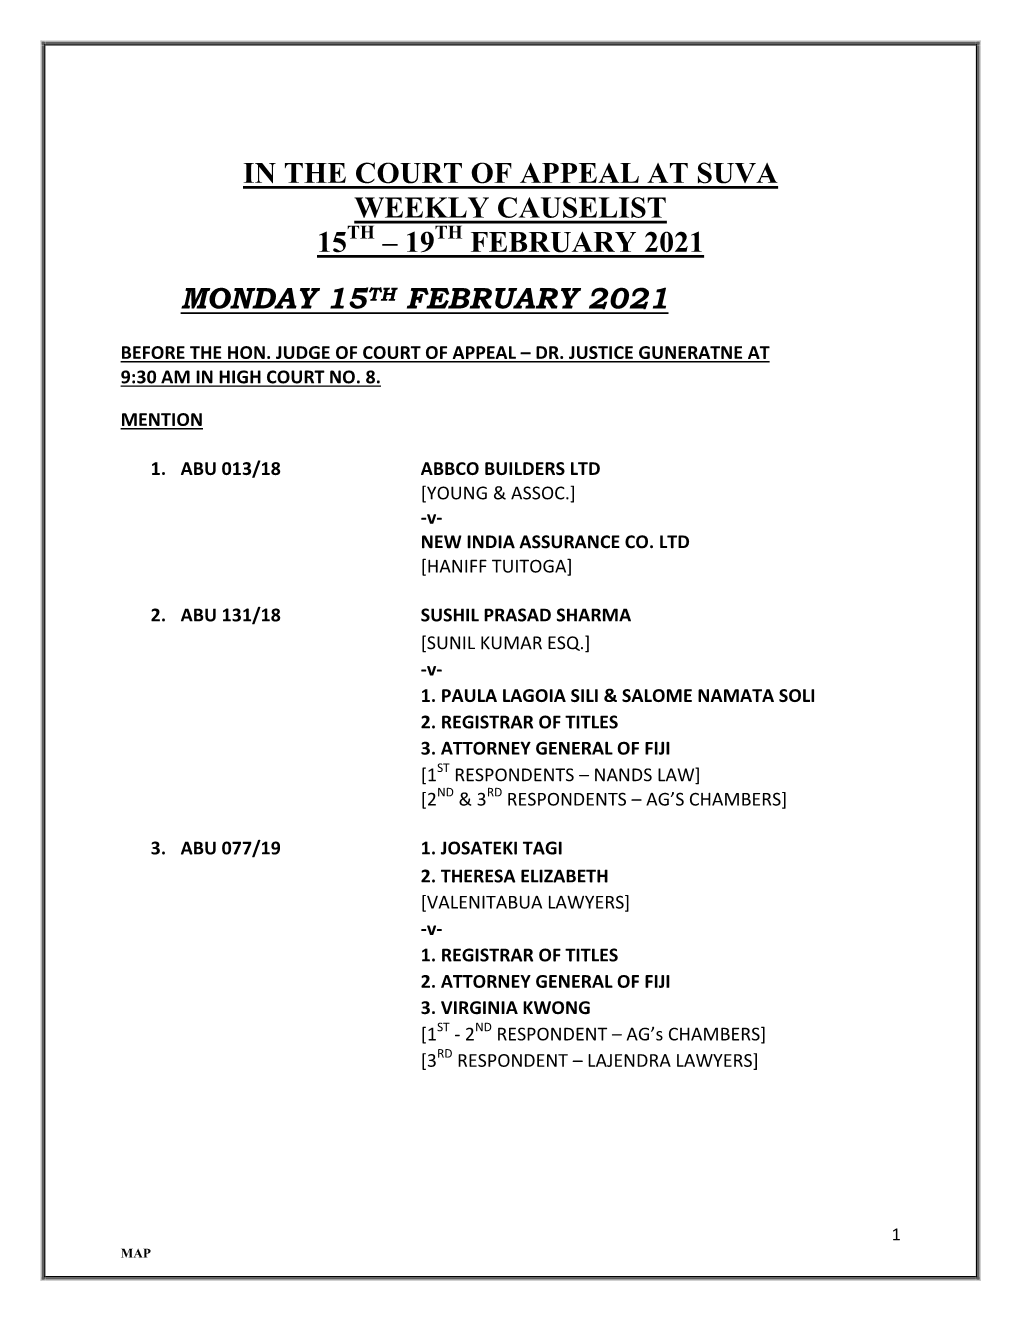 In the Court of Appeal at Suva Weekly Causelist 15Th – 19Th February 2021